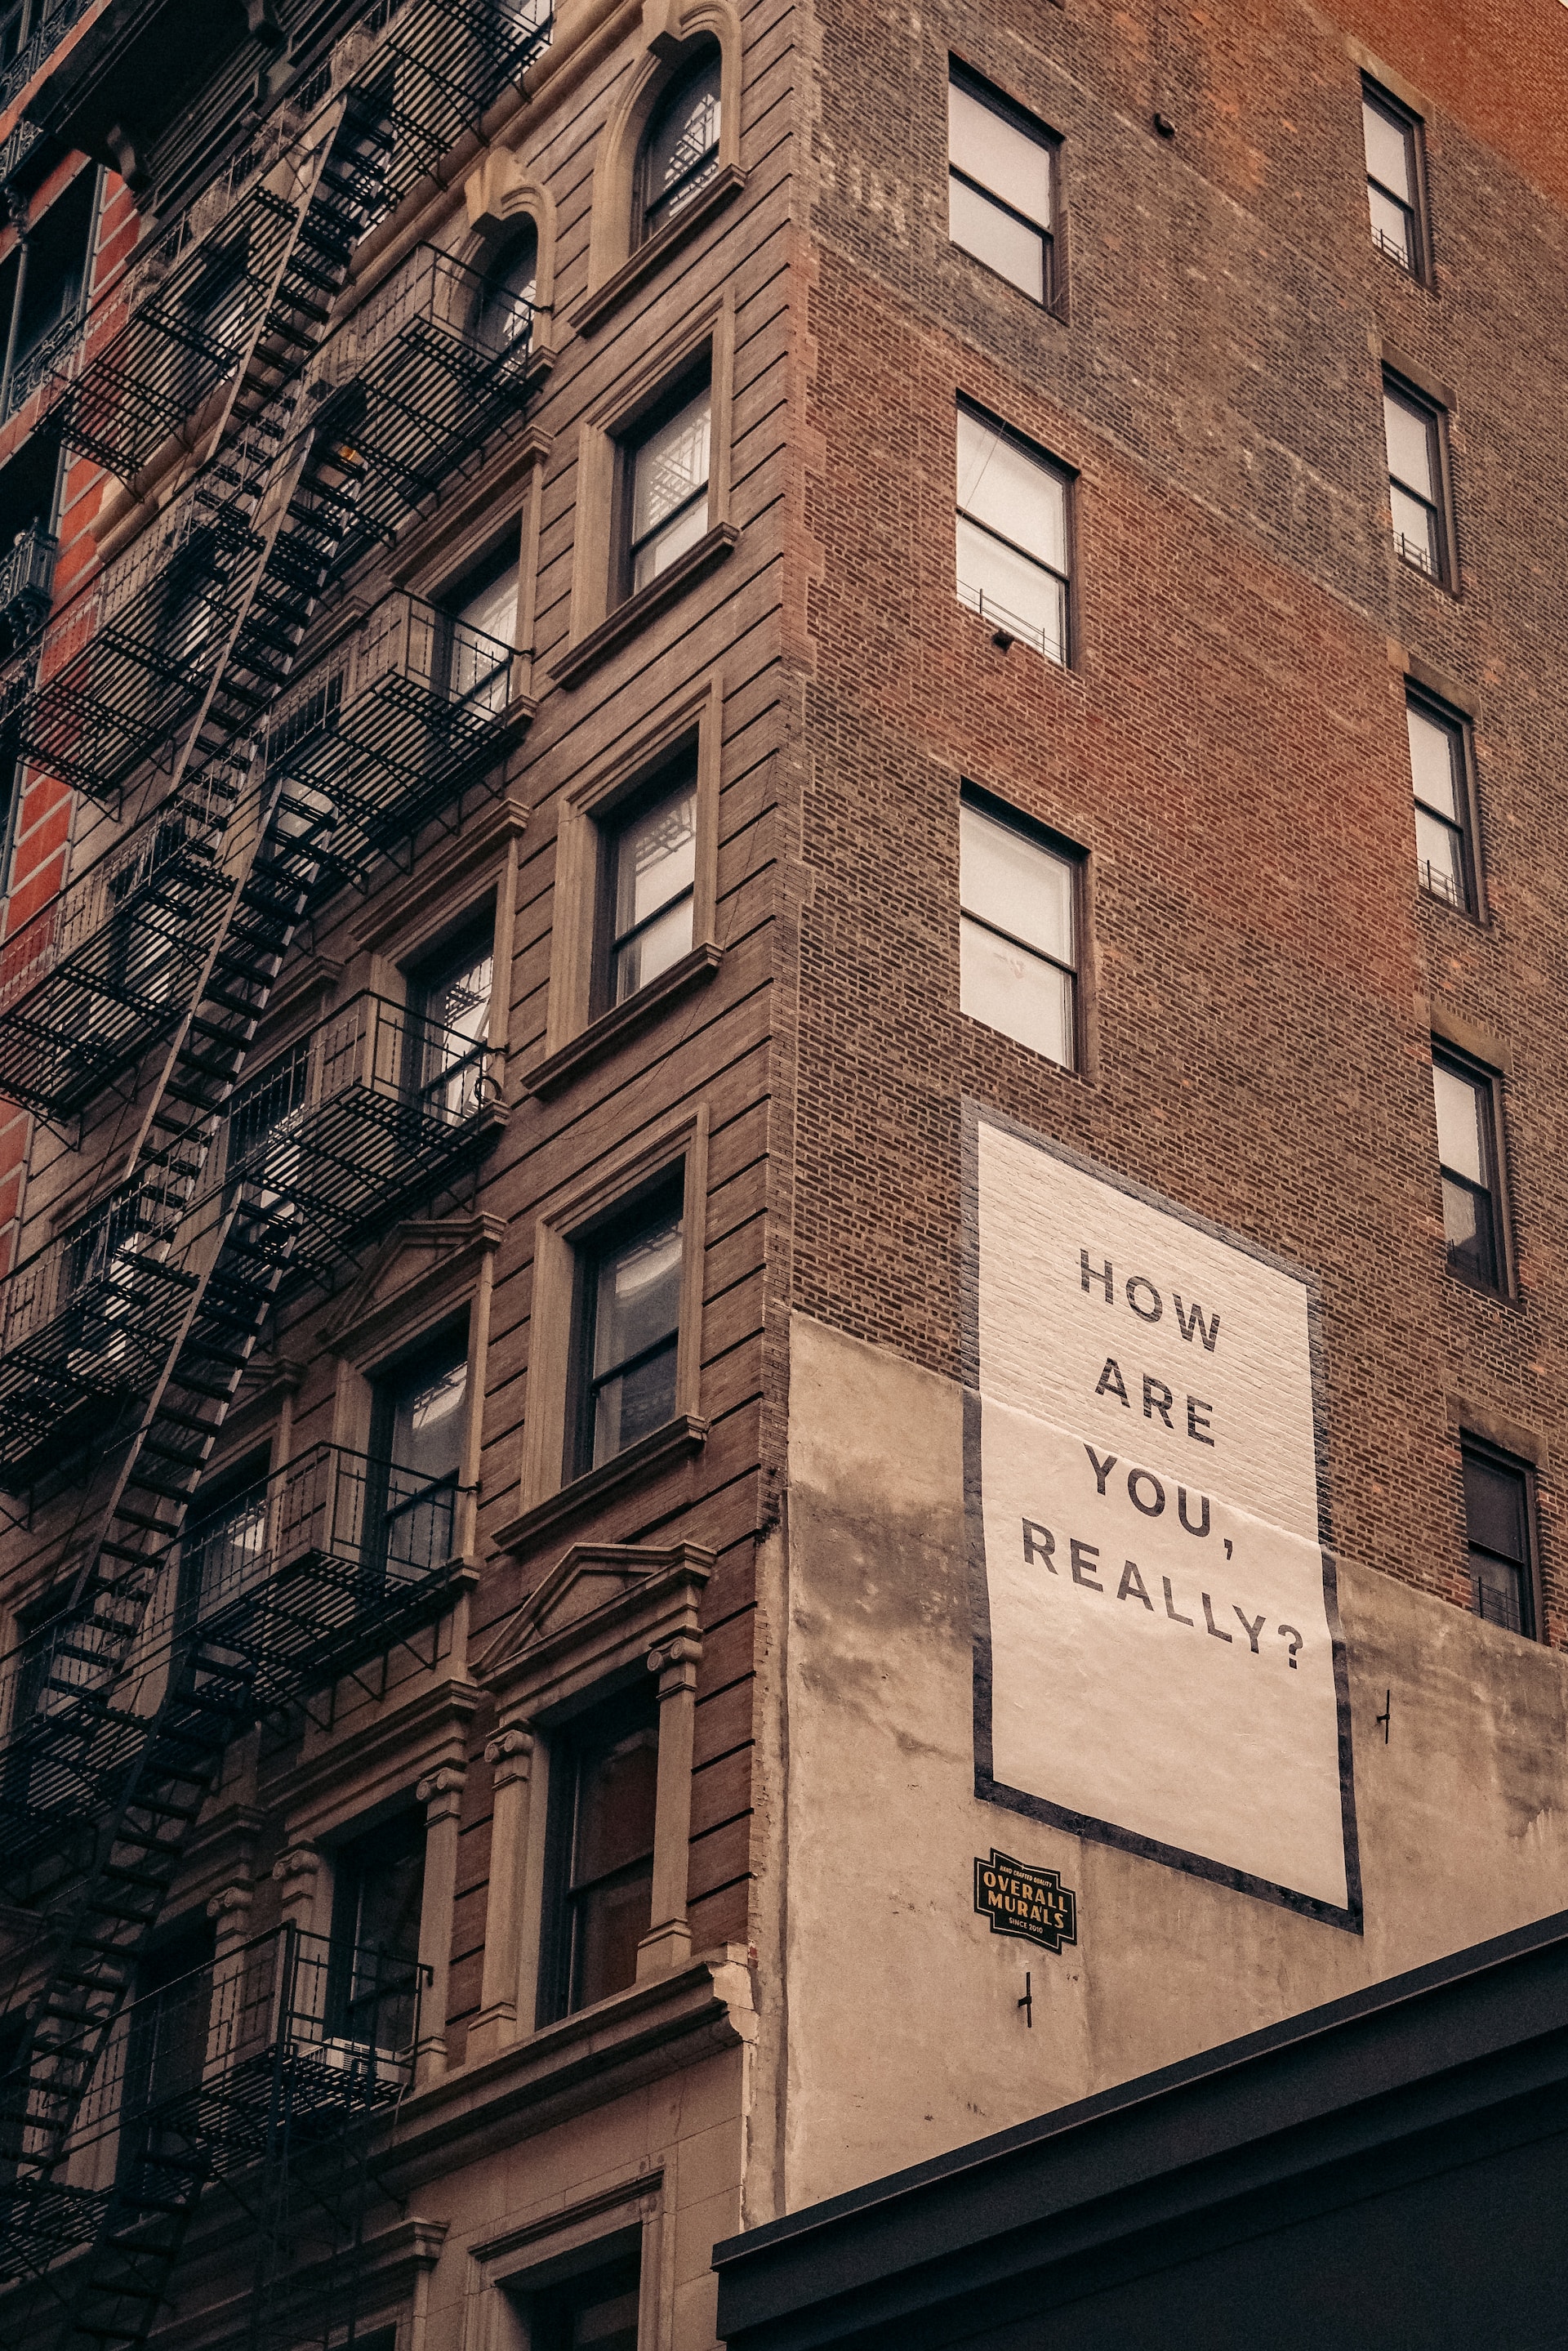 Building with sign that states "How are you really?" - Photo by Finn on Unsplash